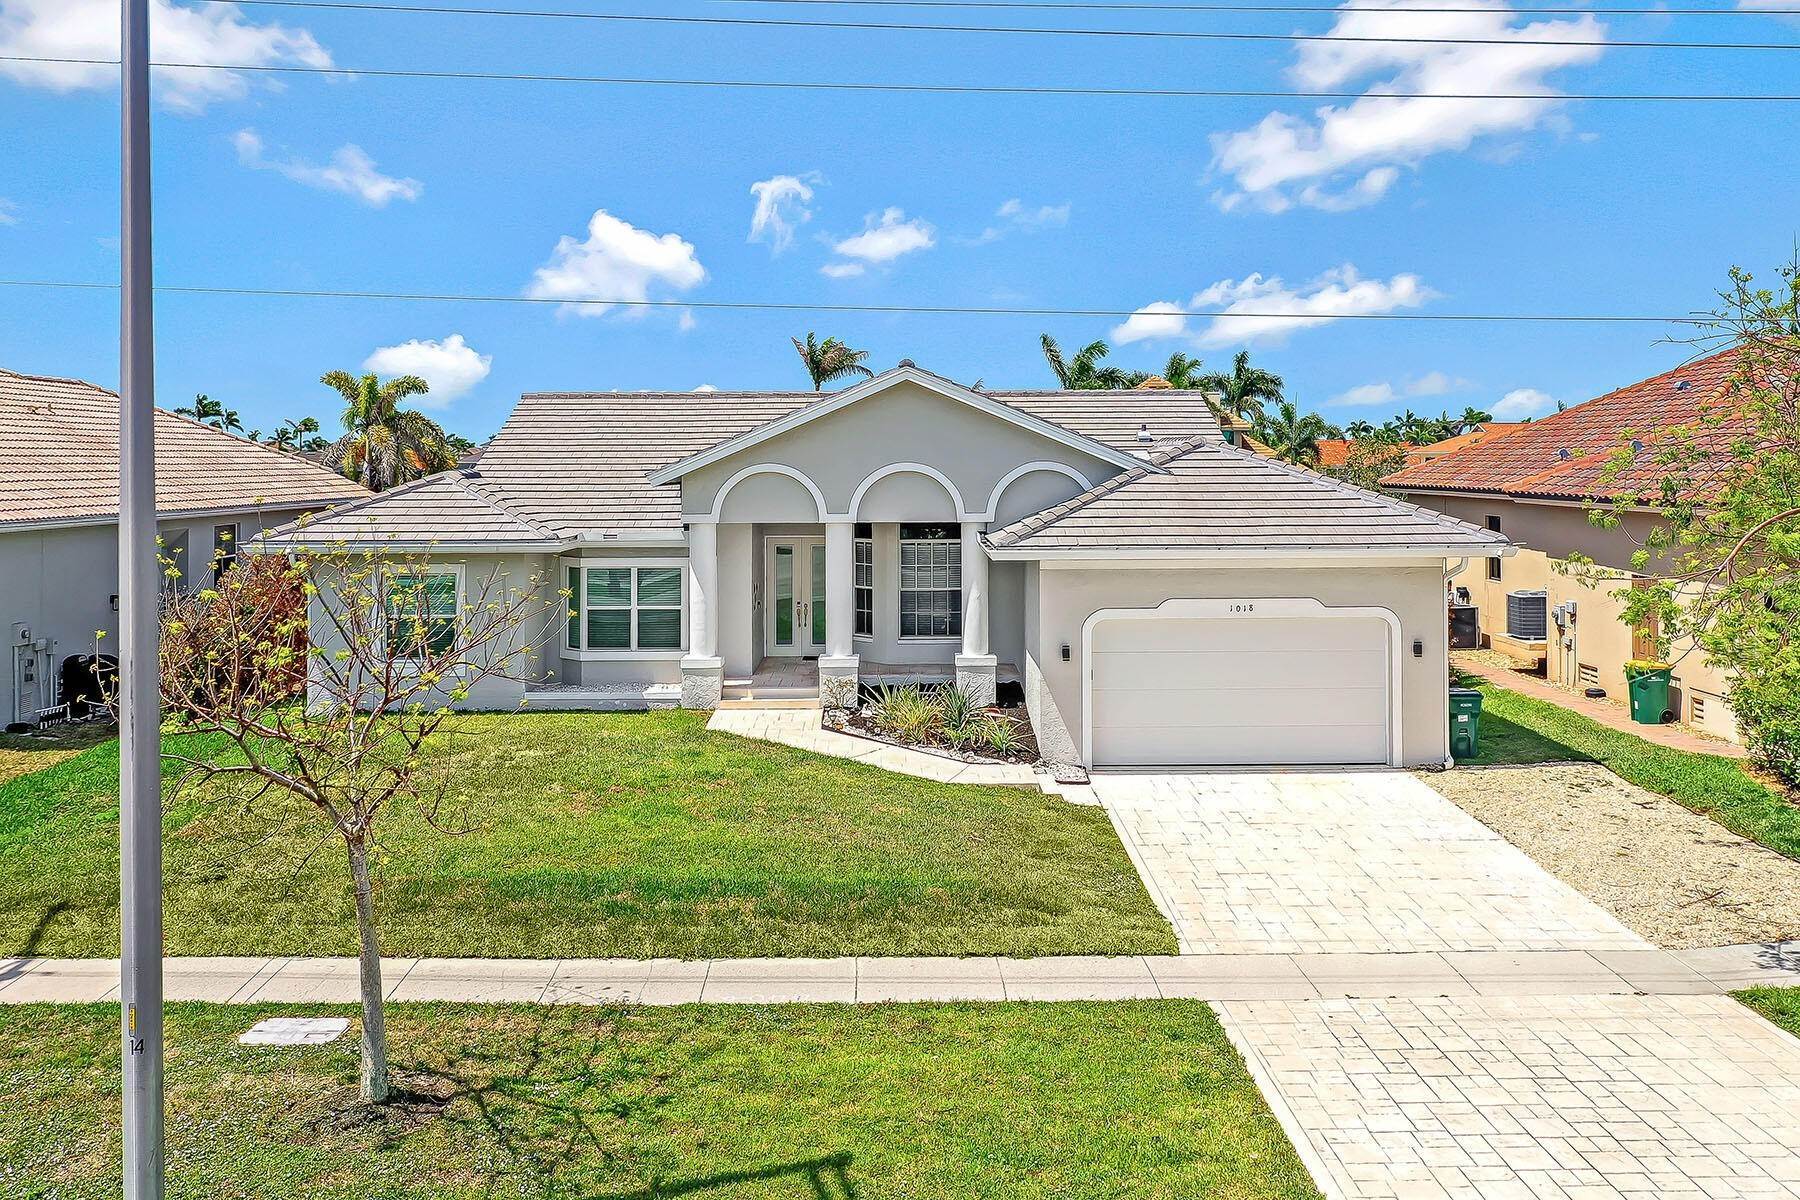 2. Single Family for Sale at Marco Island, FL 34145